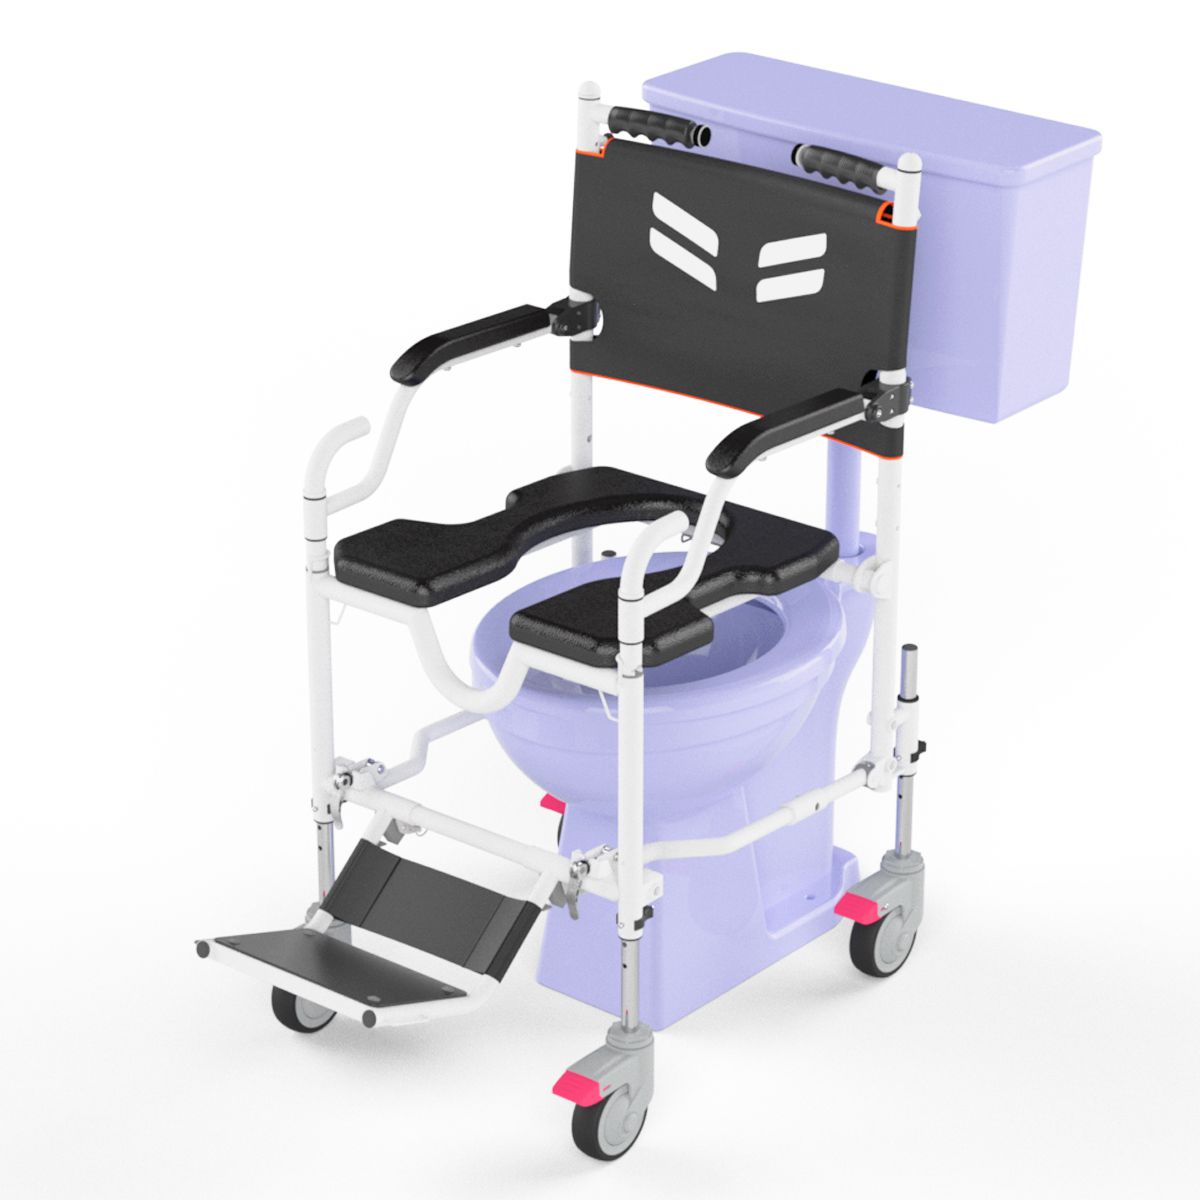 Frido GO Attendant Propelled Wheelchair | Travel and Shower Commode Wheelchair